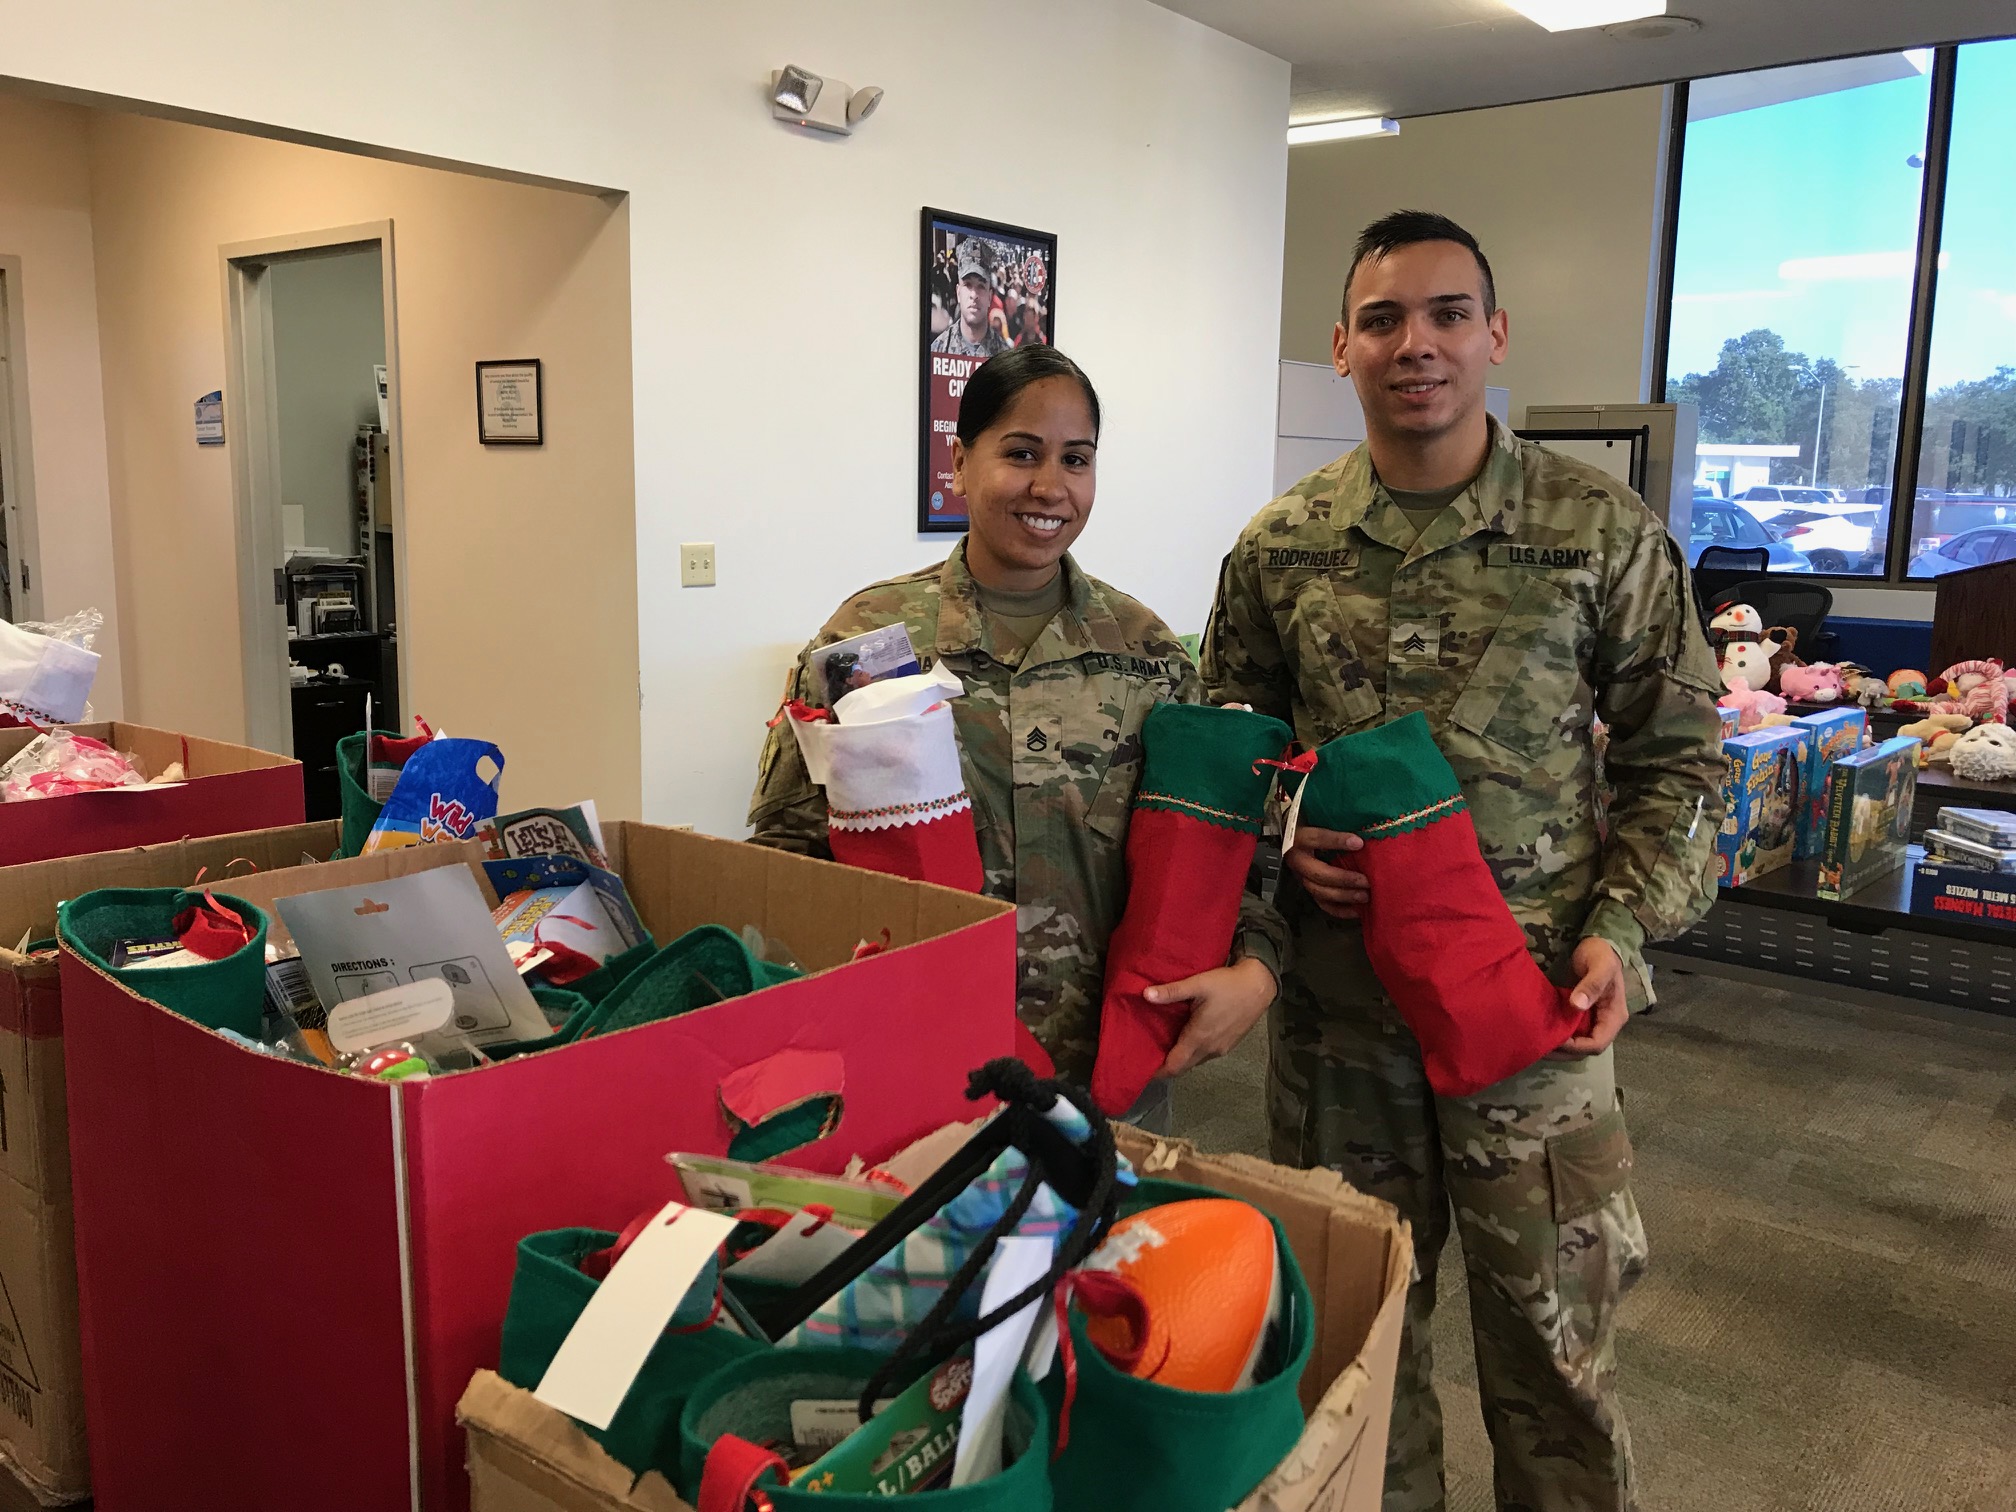 OTS 2017 - MacDill AFB stockings times two